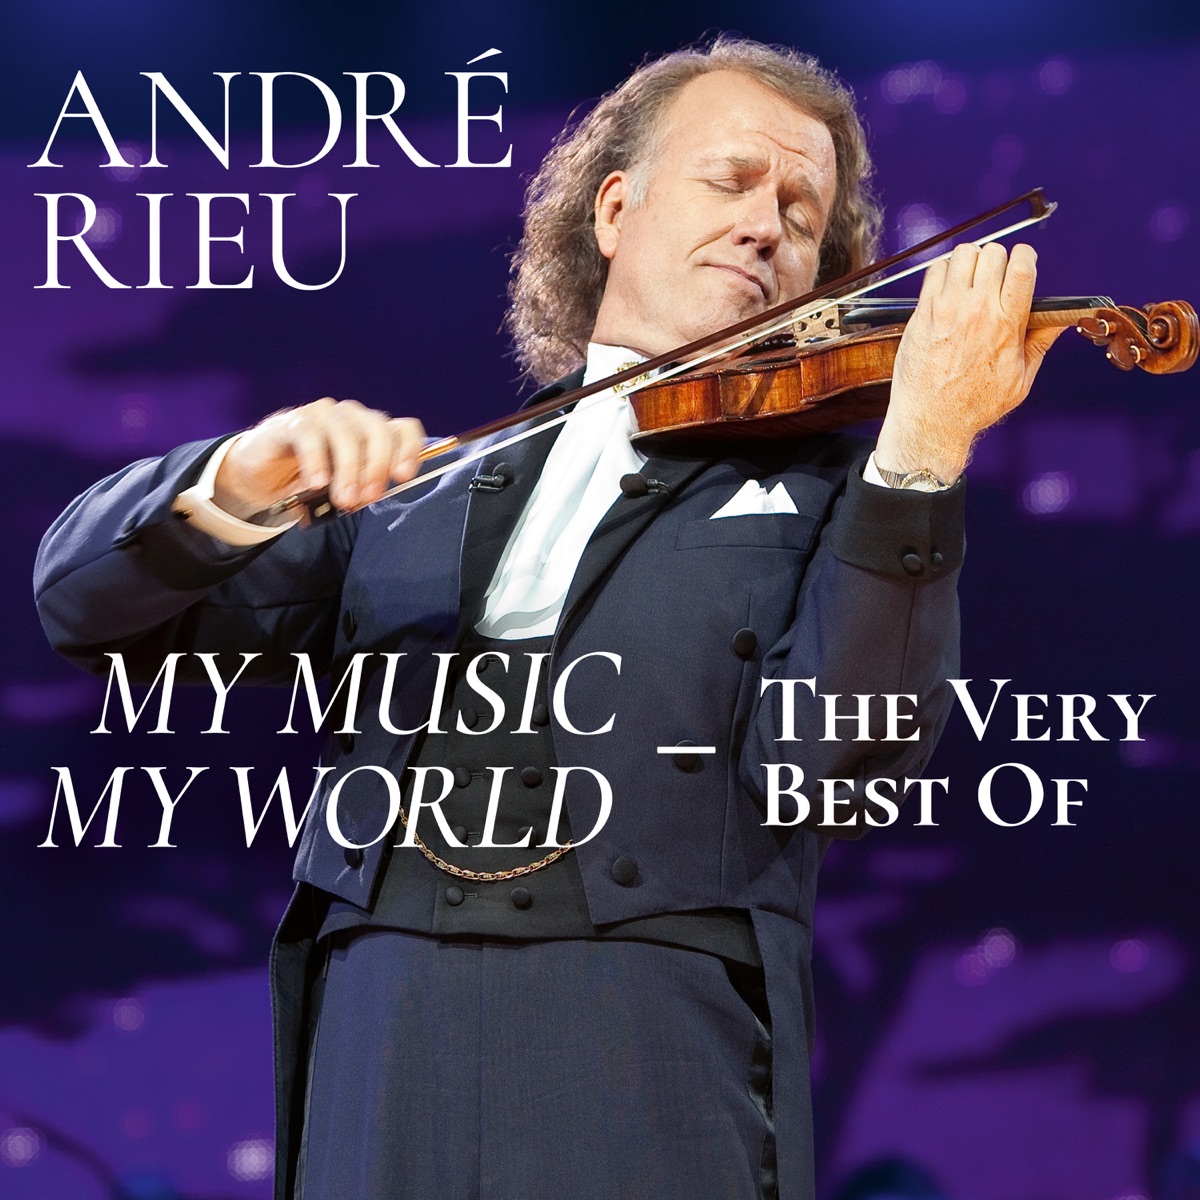 My Music - My World - The Very Best Of by André Rieu & Johann Strauss  Orchestra on Apple Music